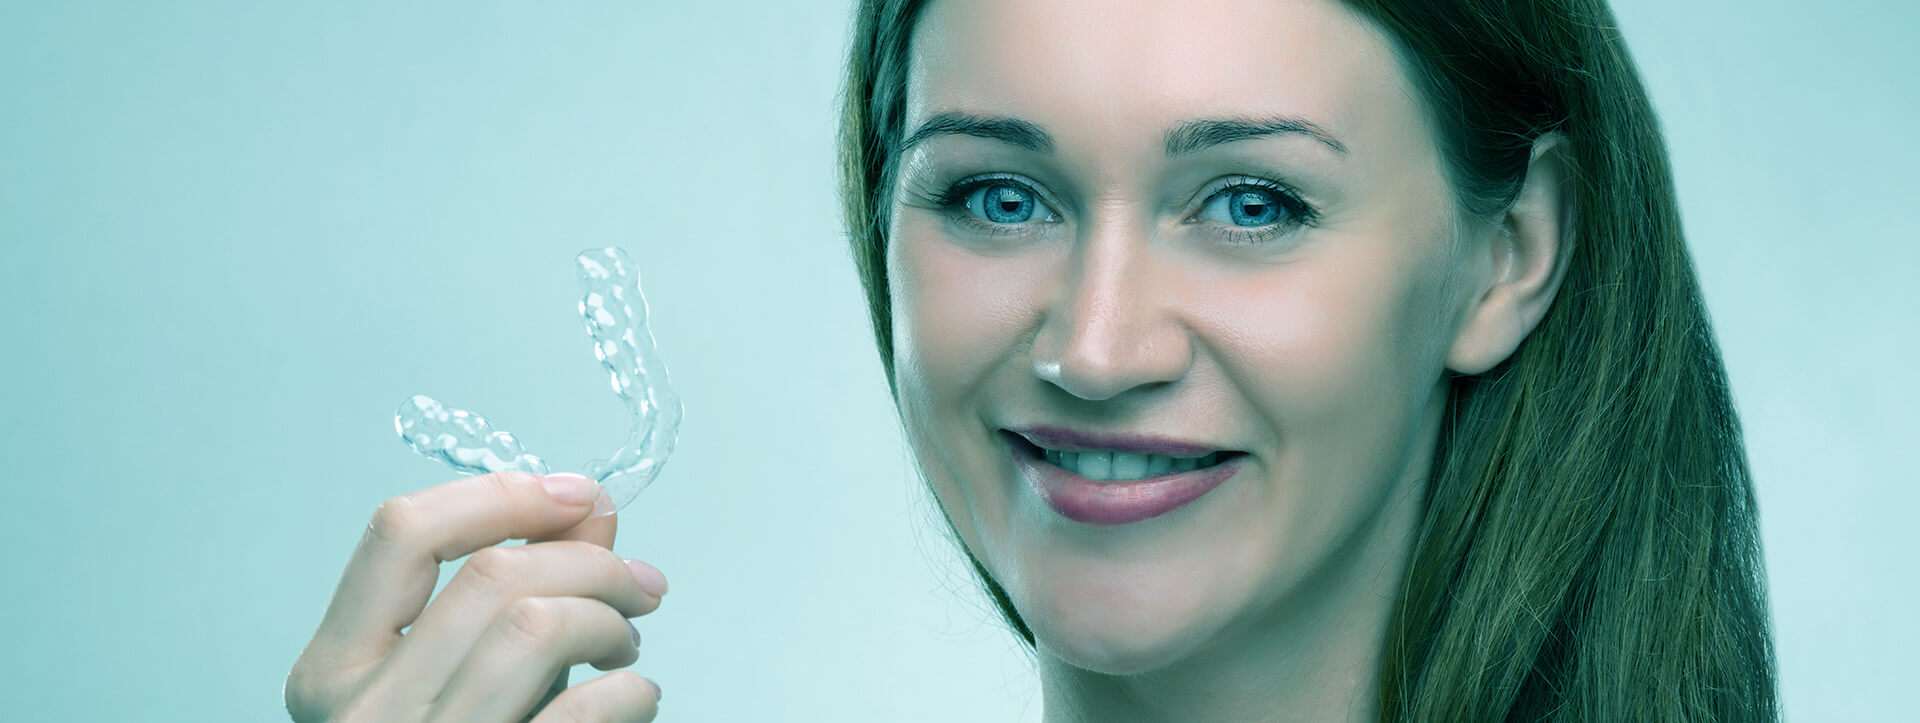 Straighten your teeth discreetly with SureSmile® clear aligners in Leominster, MA